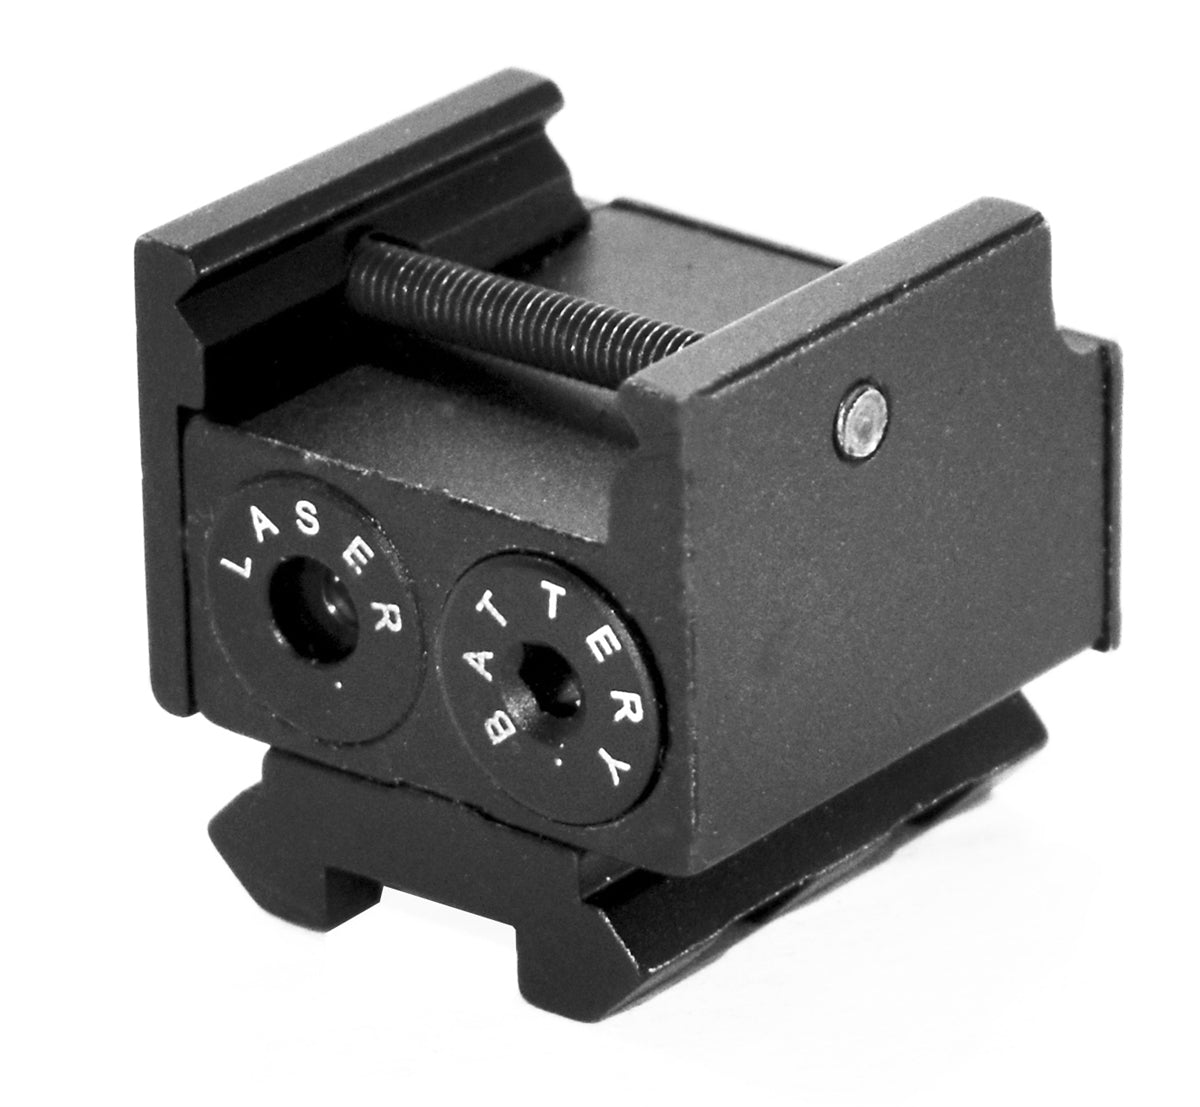 Trinity Red Dot Laser Sight Aluminum Black Compatible With Handguns With Picatinny Style Already Installed. - TRINITY SUPPLY INC